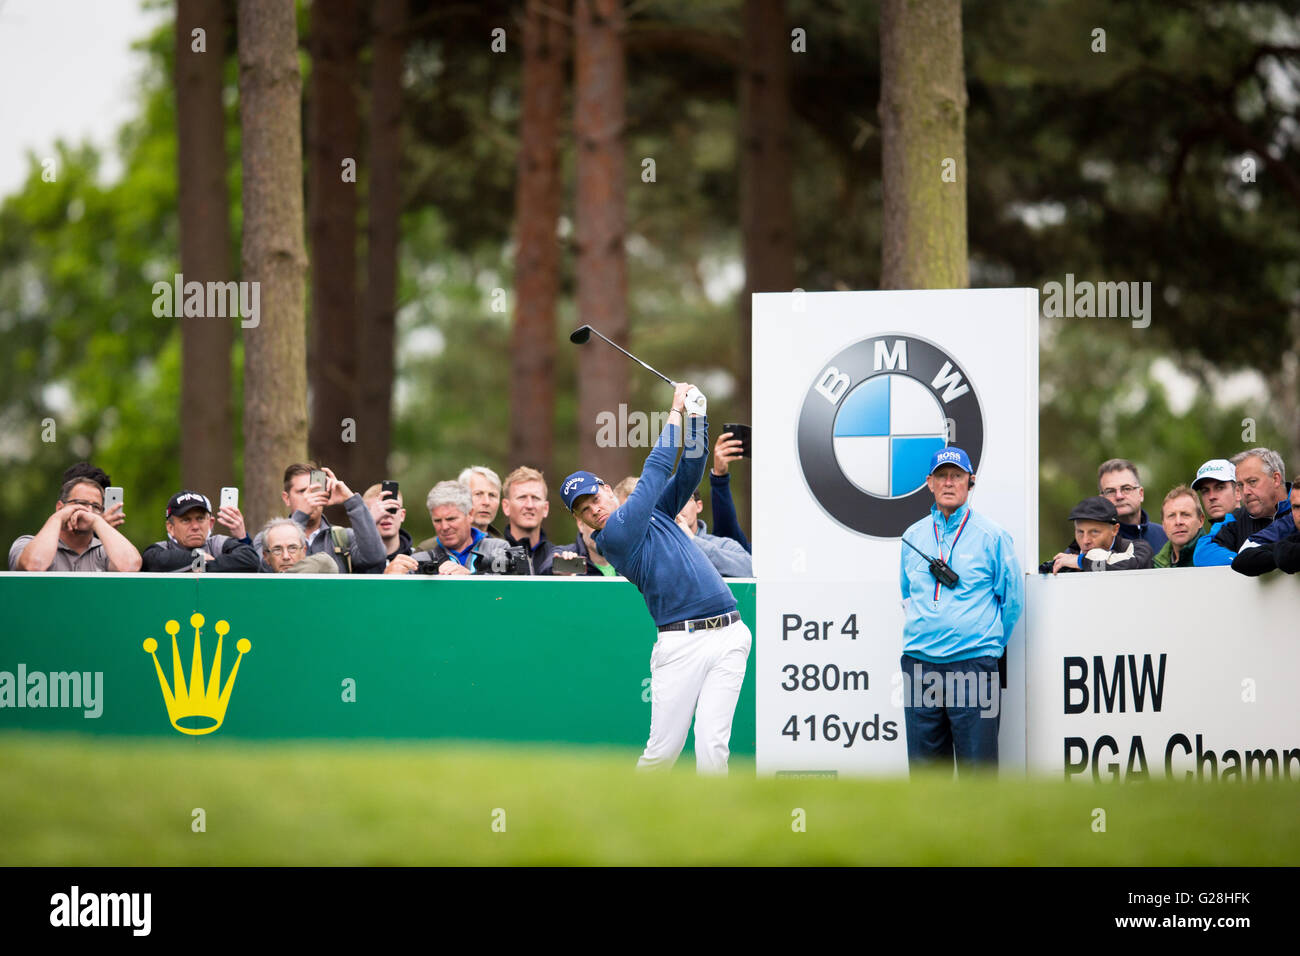 WENTWORTH, UK: May, 25, 2016 Danny Willett tees off in the BMW PGA Celebrity Pro-Am, ahead of the Championship at Wentworth. Stock Photo